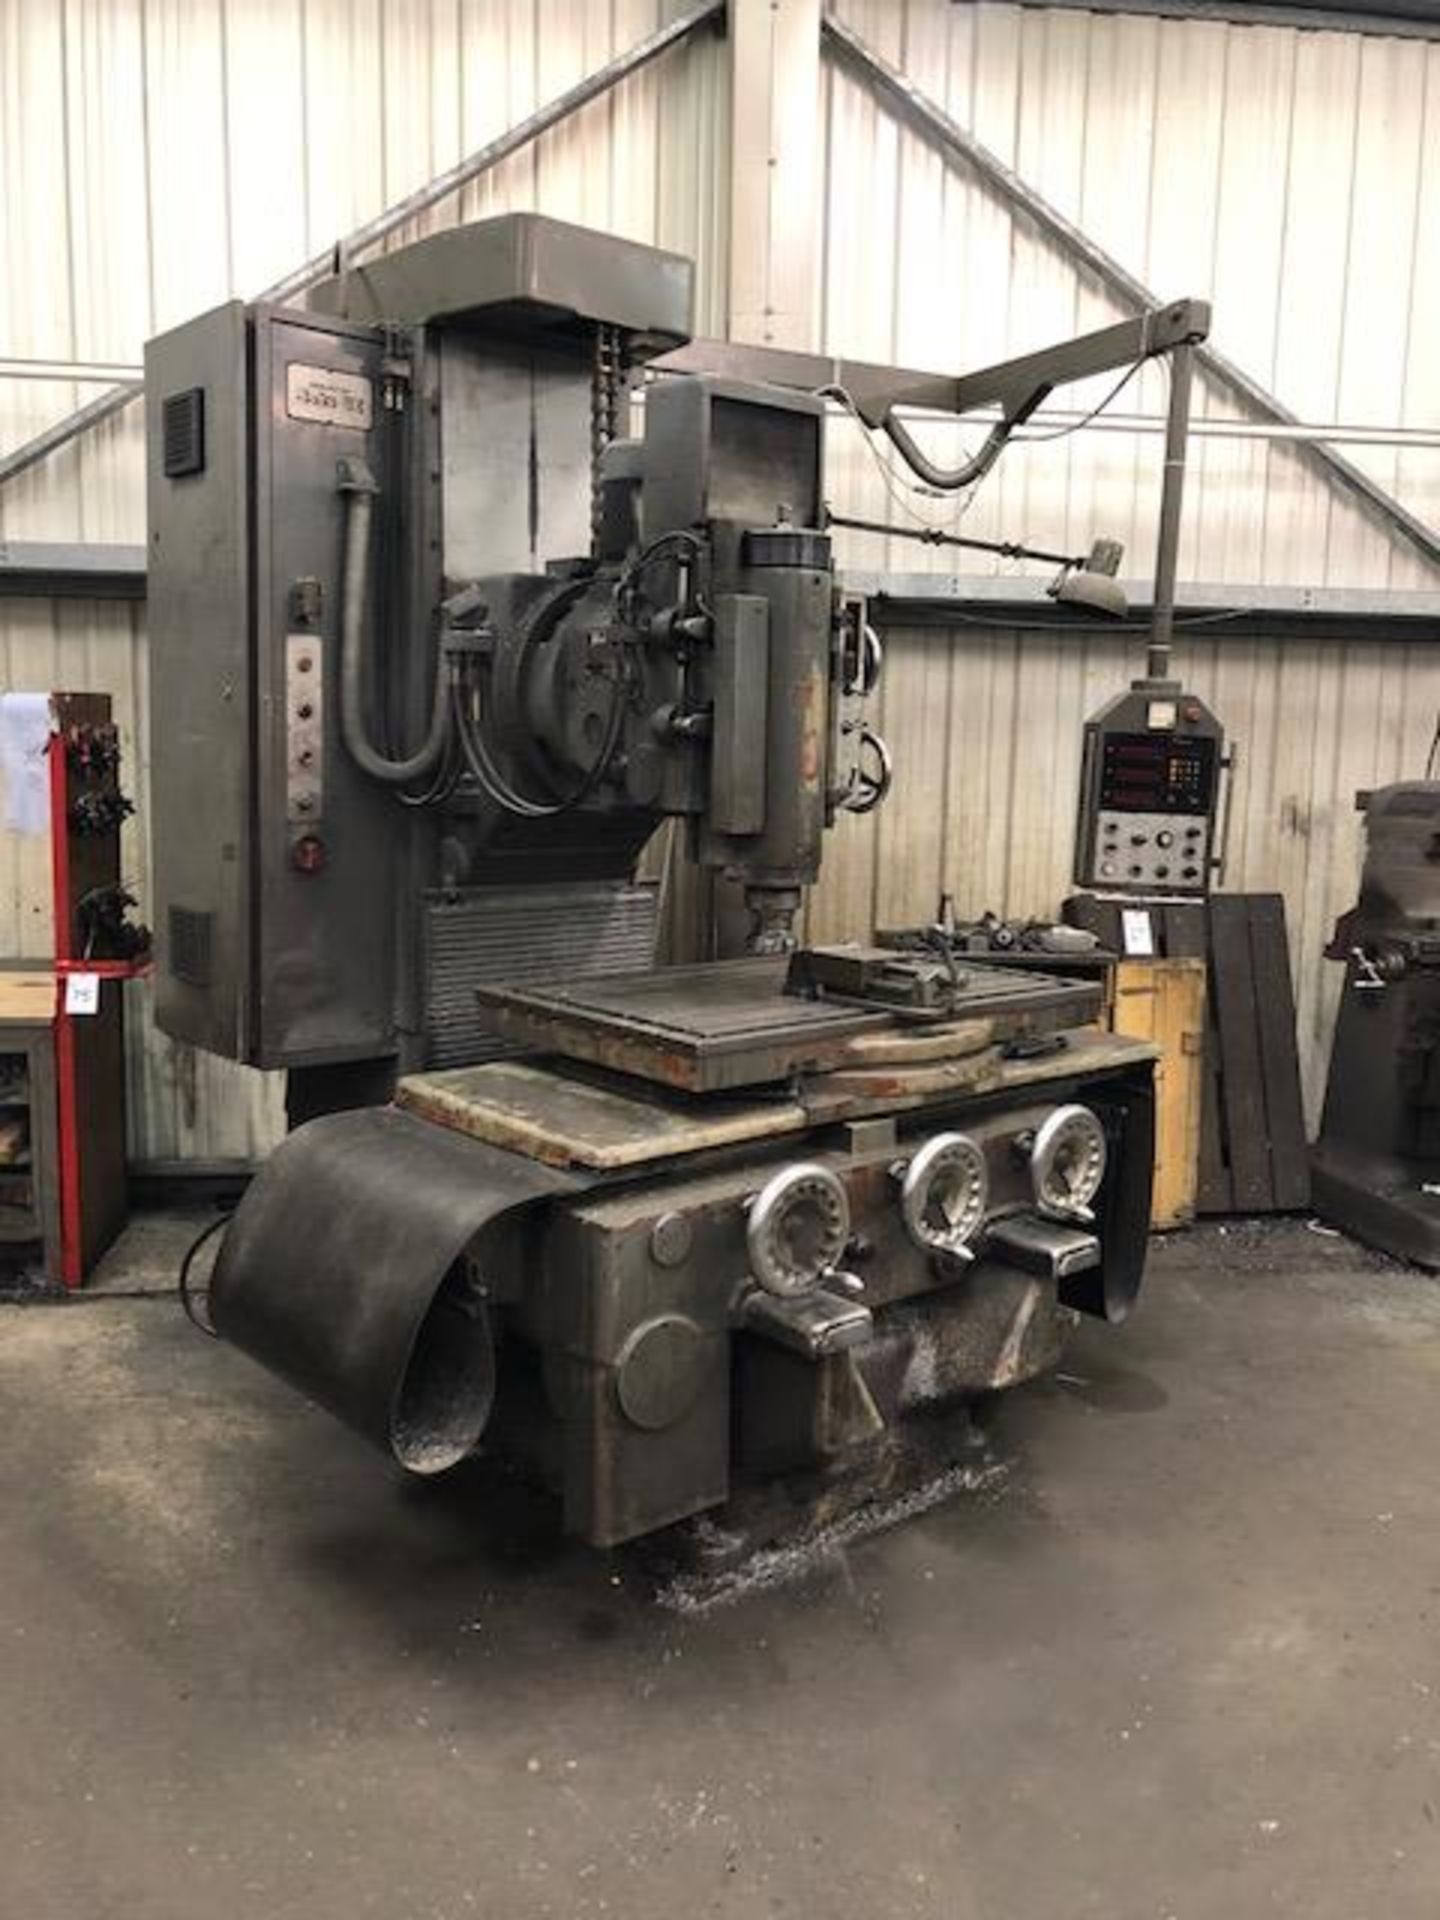 BOHNER & KOHLE (rebuilt by BOKO UK) Type RS 1 E vertical jig boring and milling machine with